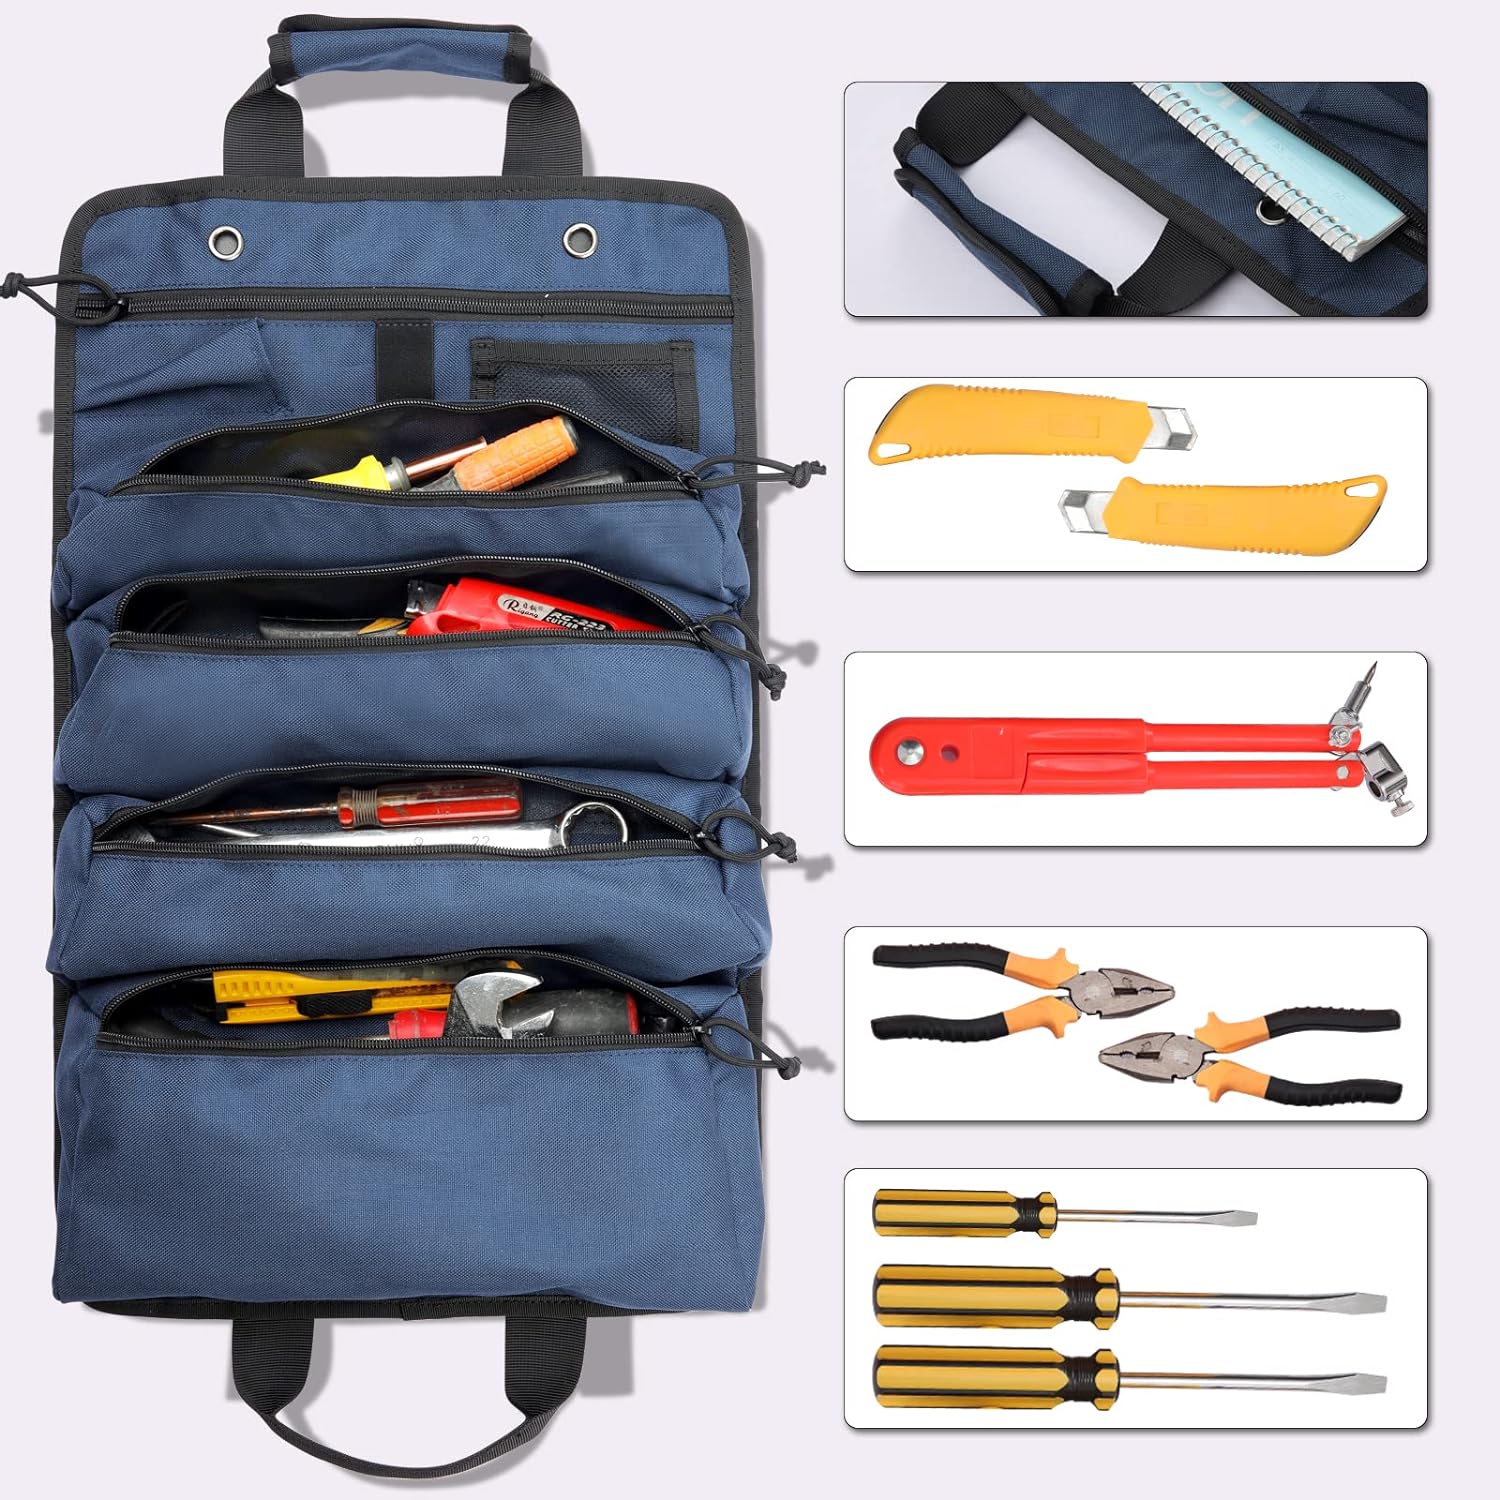 Koolertron Roll Up Tool Bag Organizer, Multi Tool Wrench Roll Tool Storage Bag, 4 Zippers Waterproof Canvas Roll Tool Pockets Bag for Mechanic/Electrician, Tool Roll Pouch